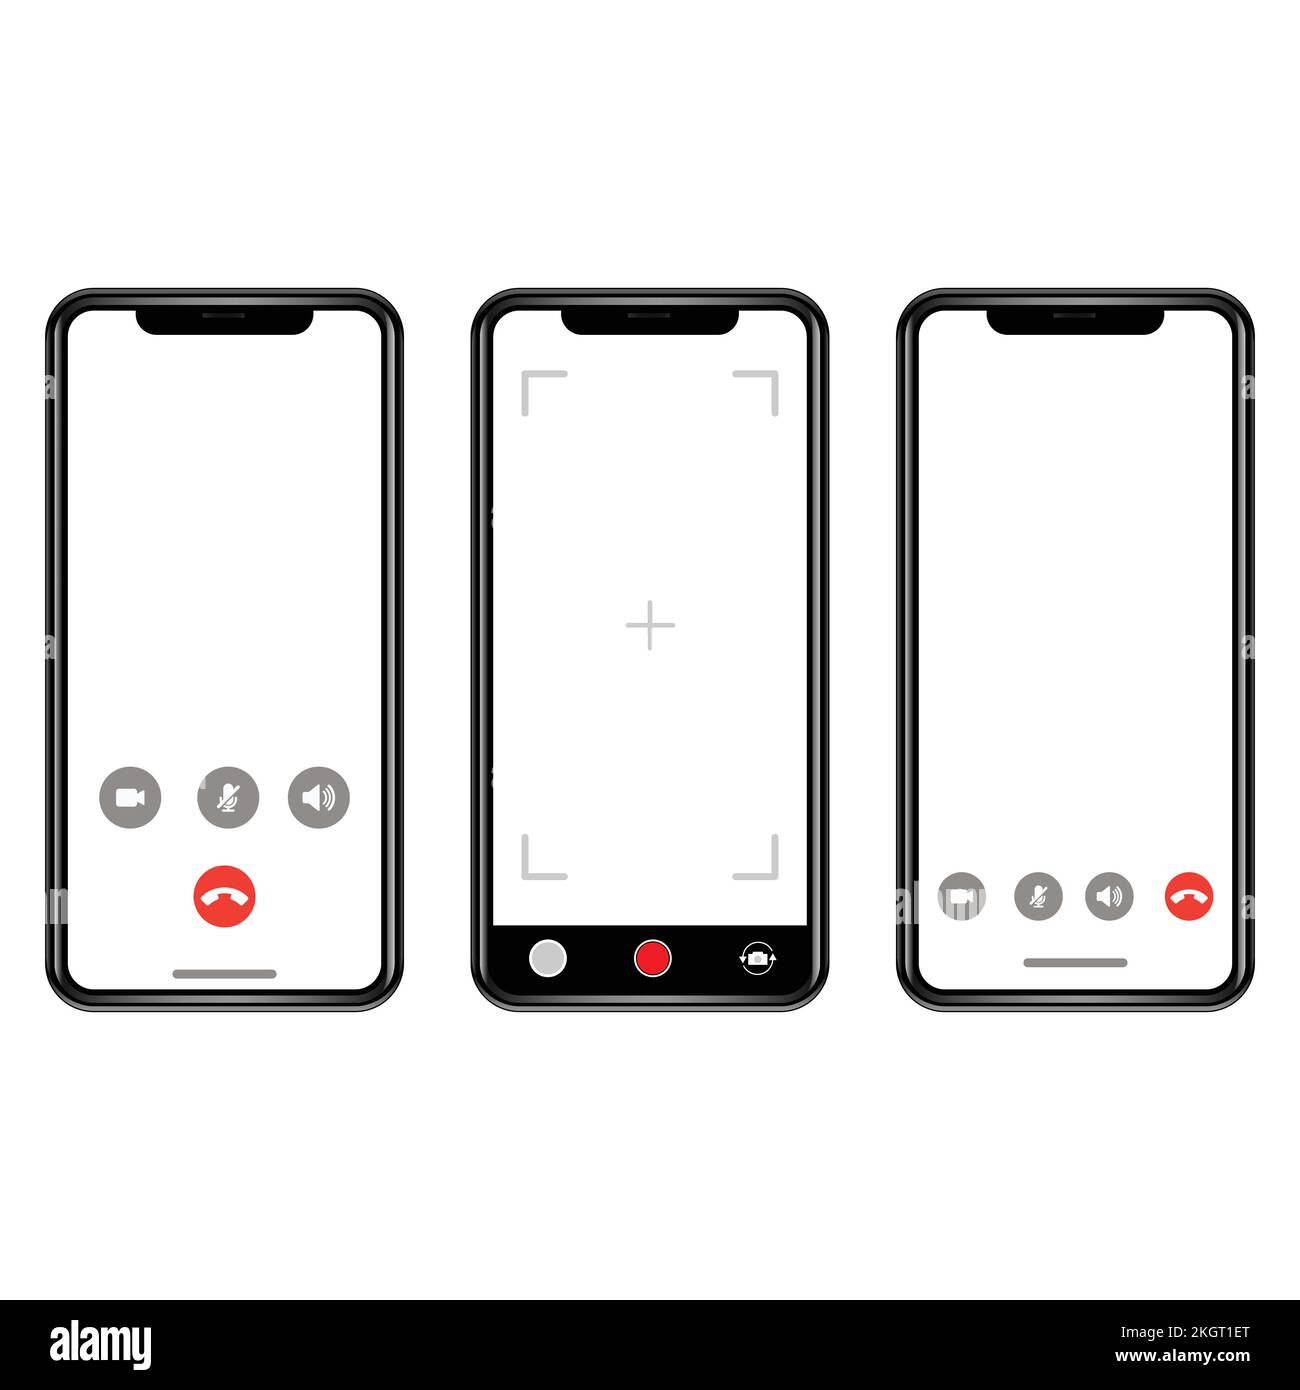 Iphone calling screen Stock Vector Images - Alamy